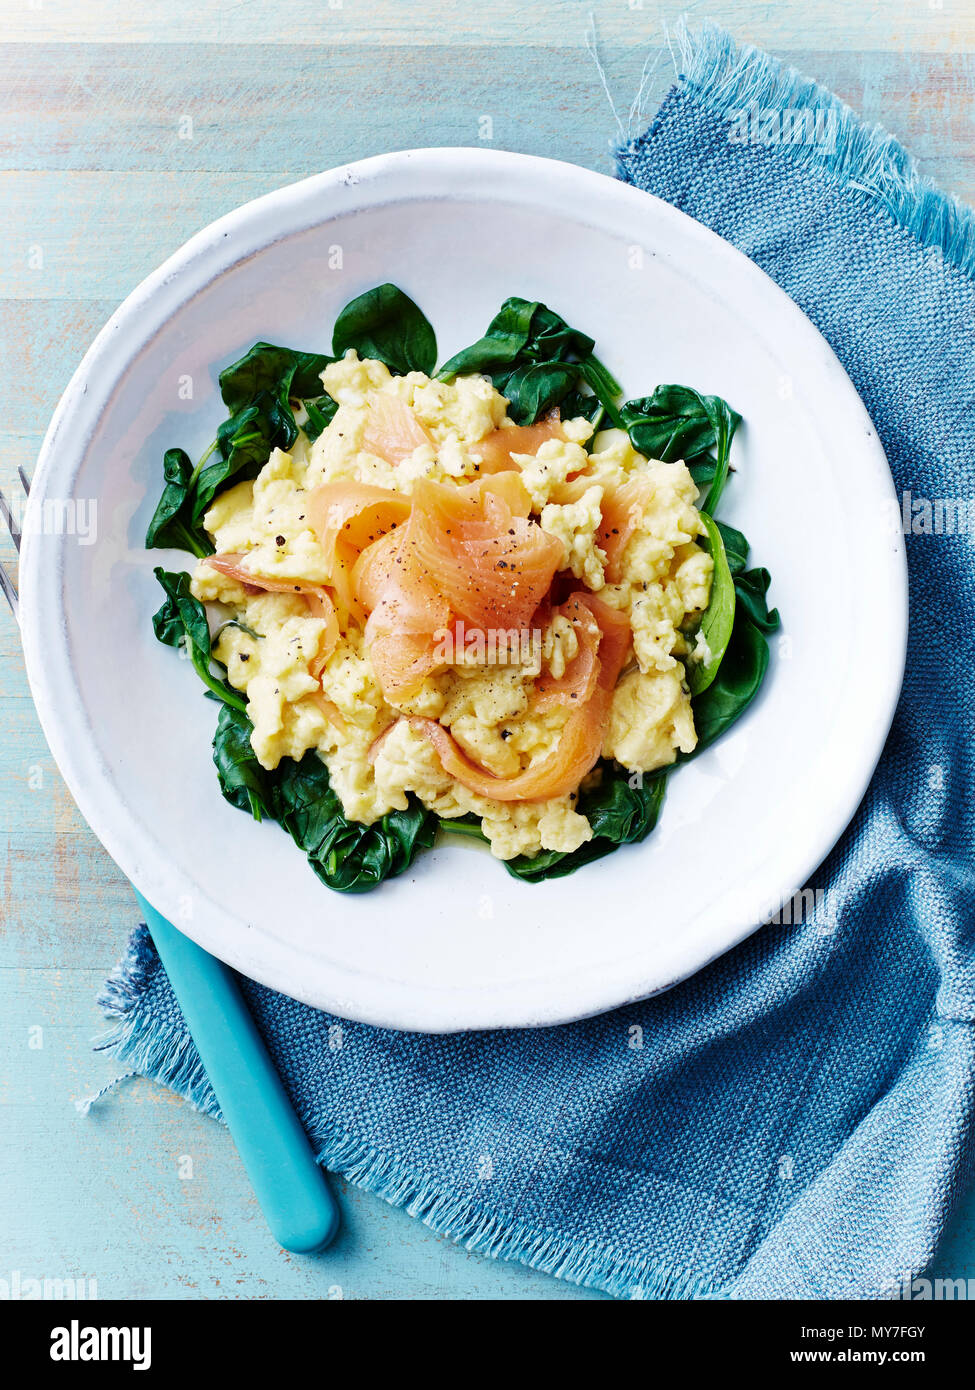 Still life with plate of scrambled eggs and salmon on spinach, overhead view Stock Photo